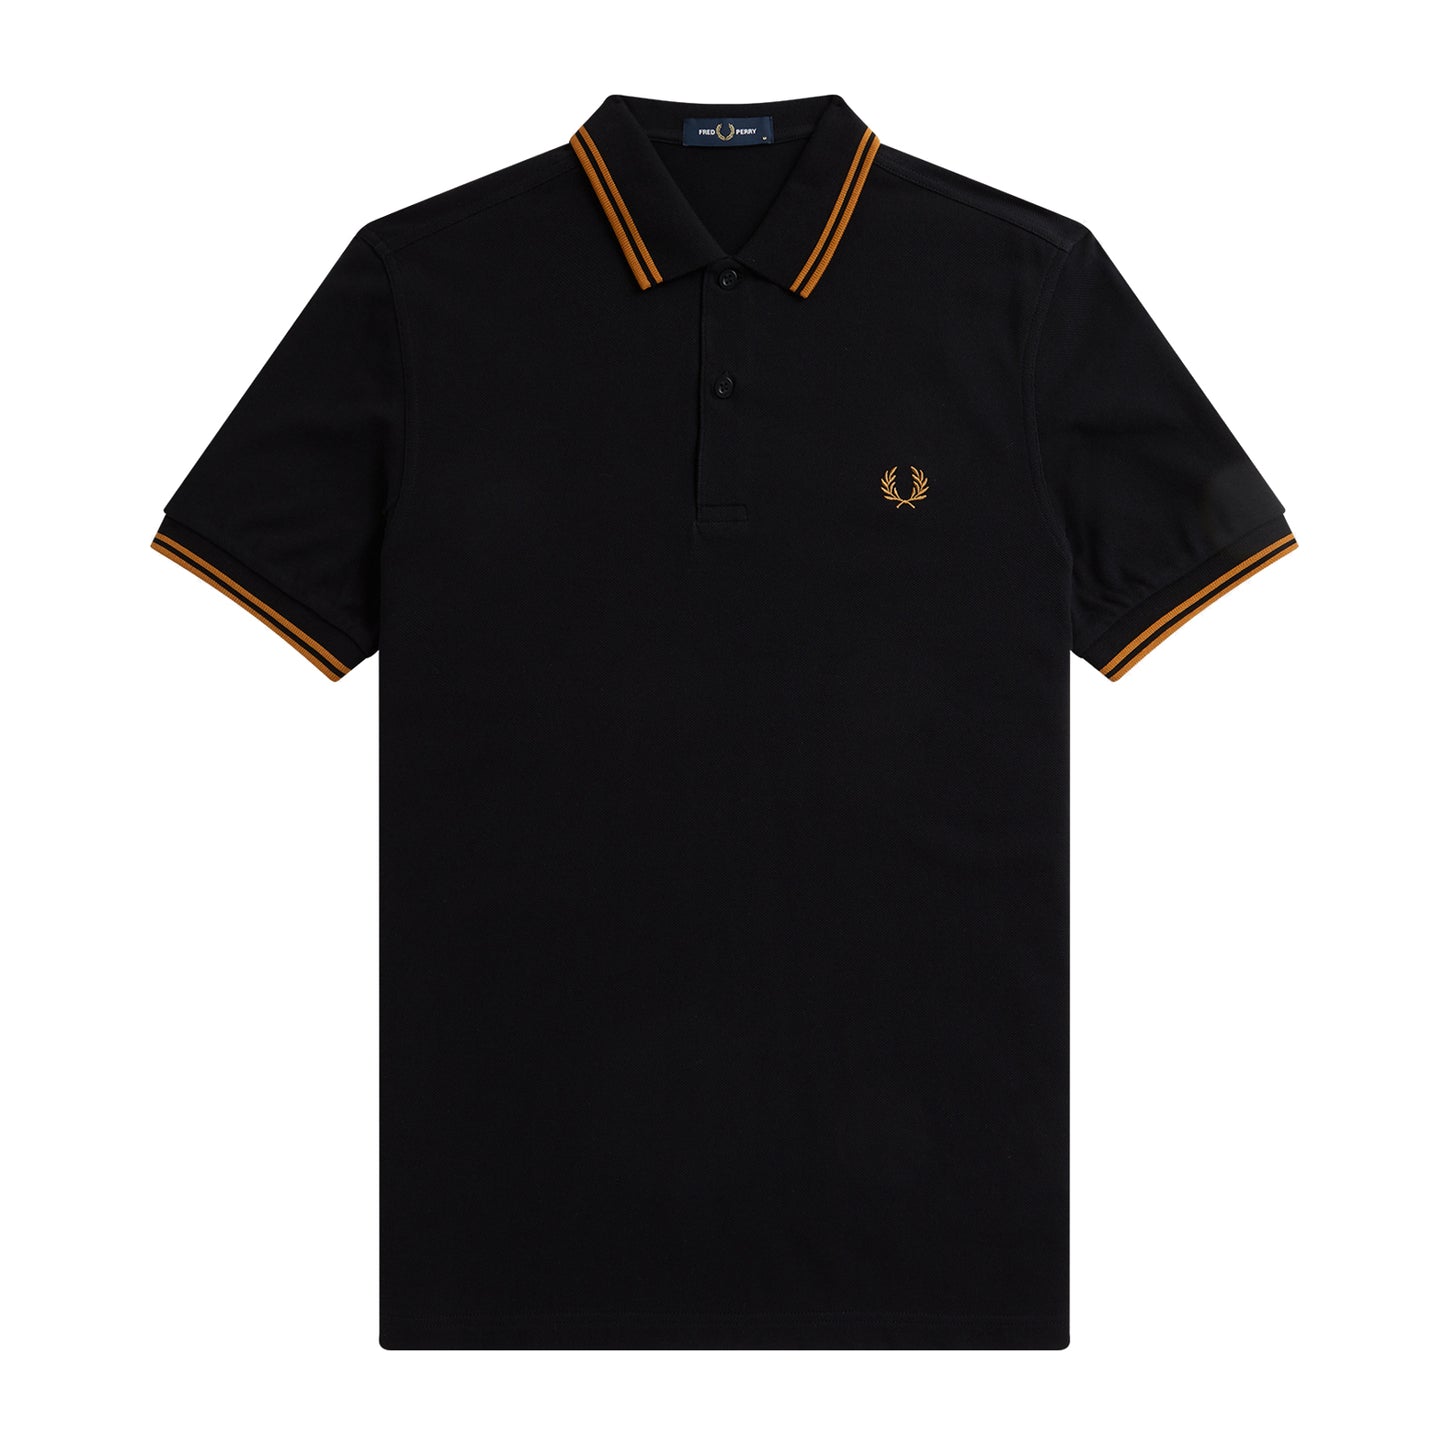 Fred Perry Twin Tipped Fred Perry Shirt Black/Dark Caramel Foto de frente.